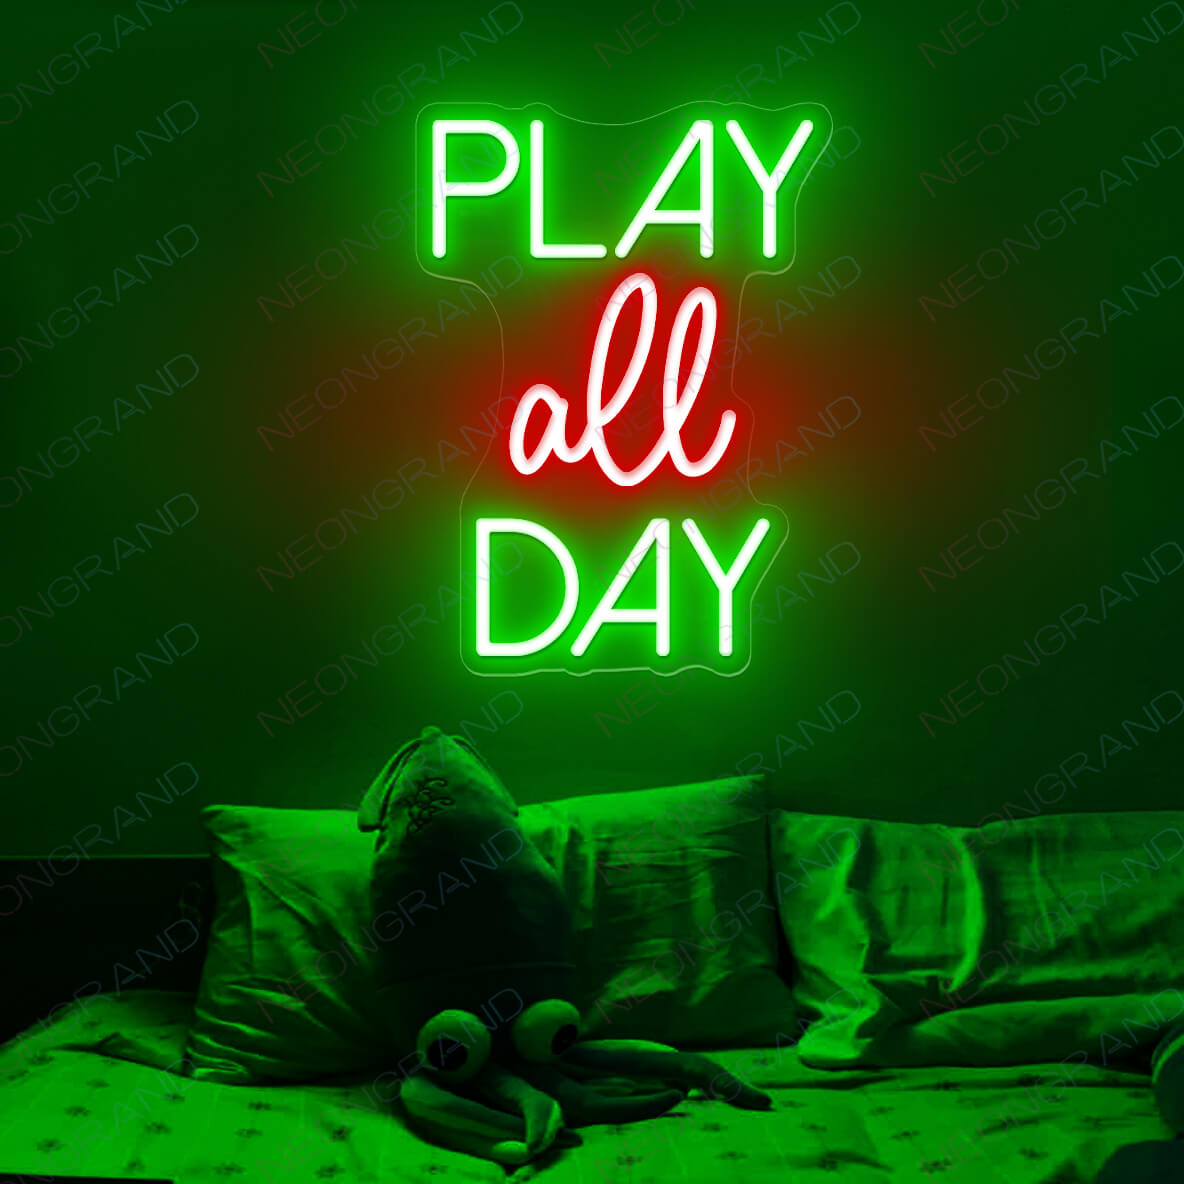 Play All Day Neon Sign Led Light green